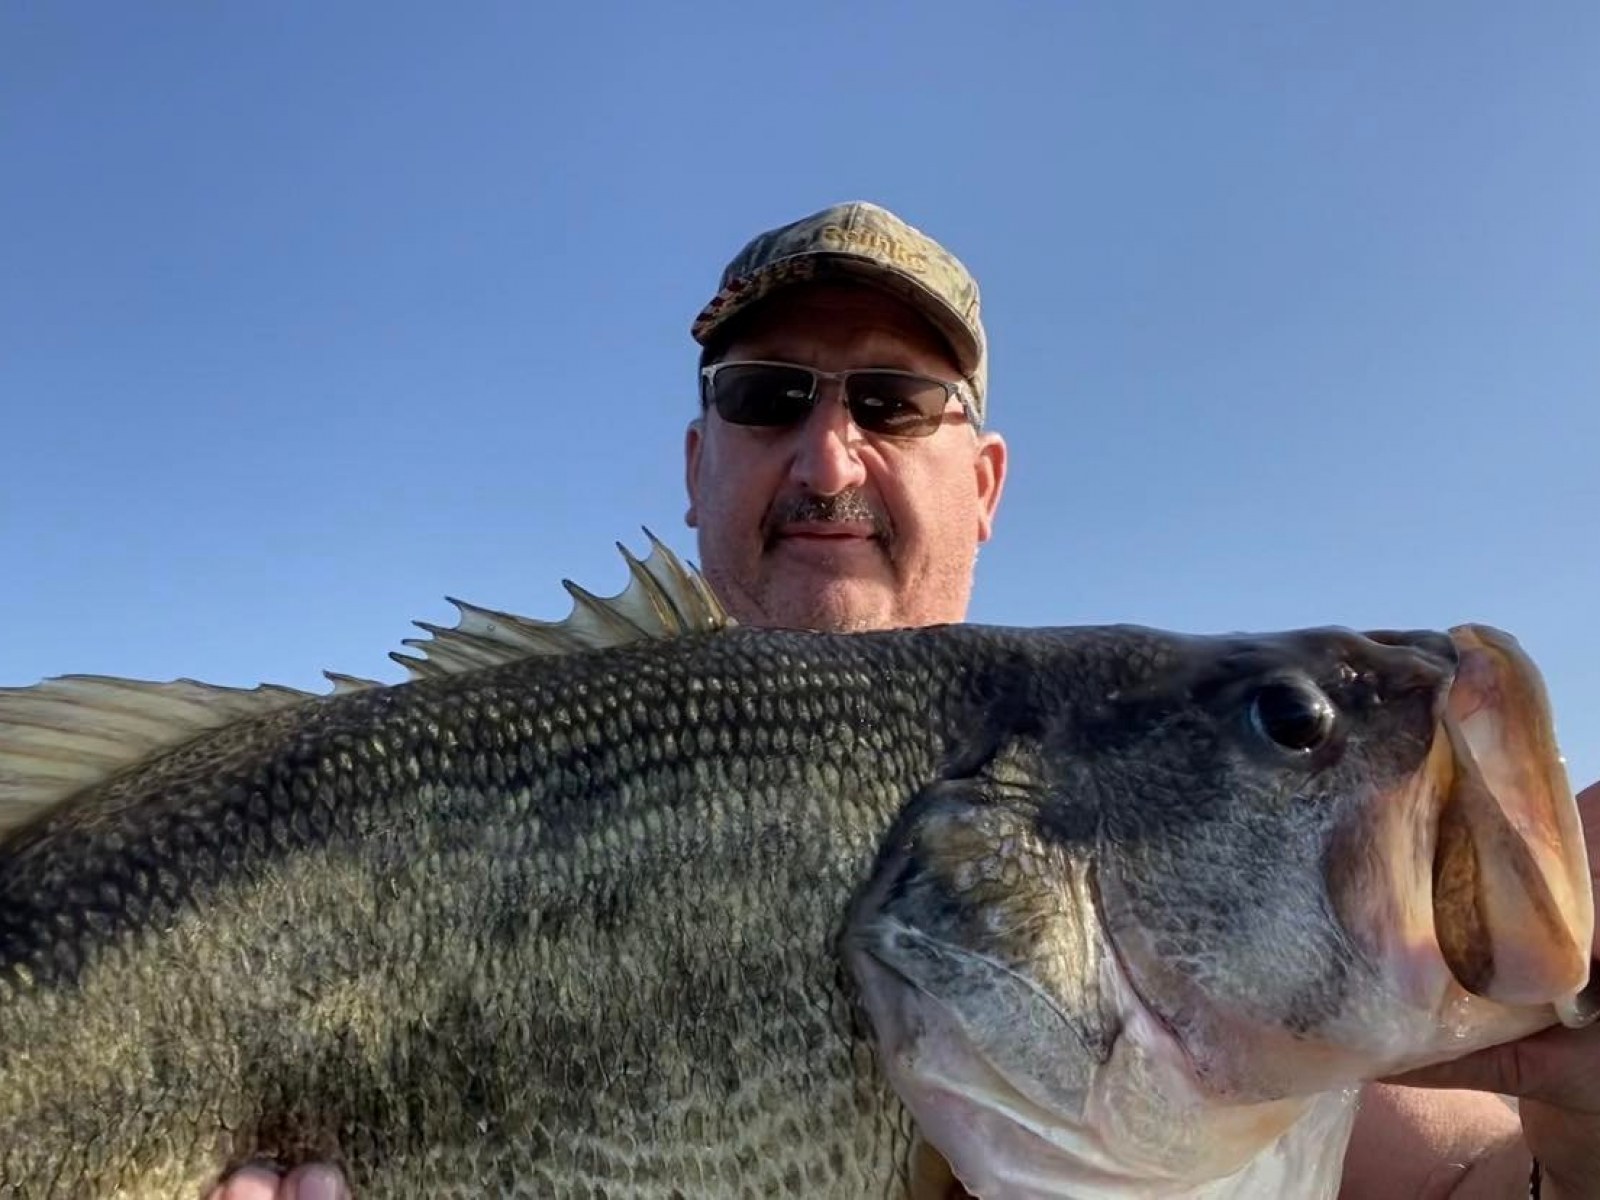 Man Catches 'Monster' Bass With Plastic Worm, Throws It Back